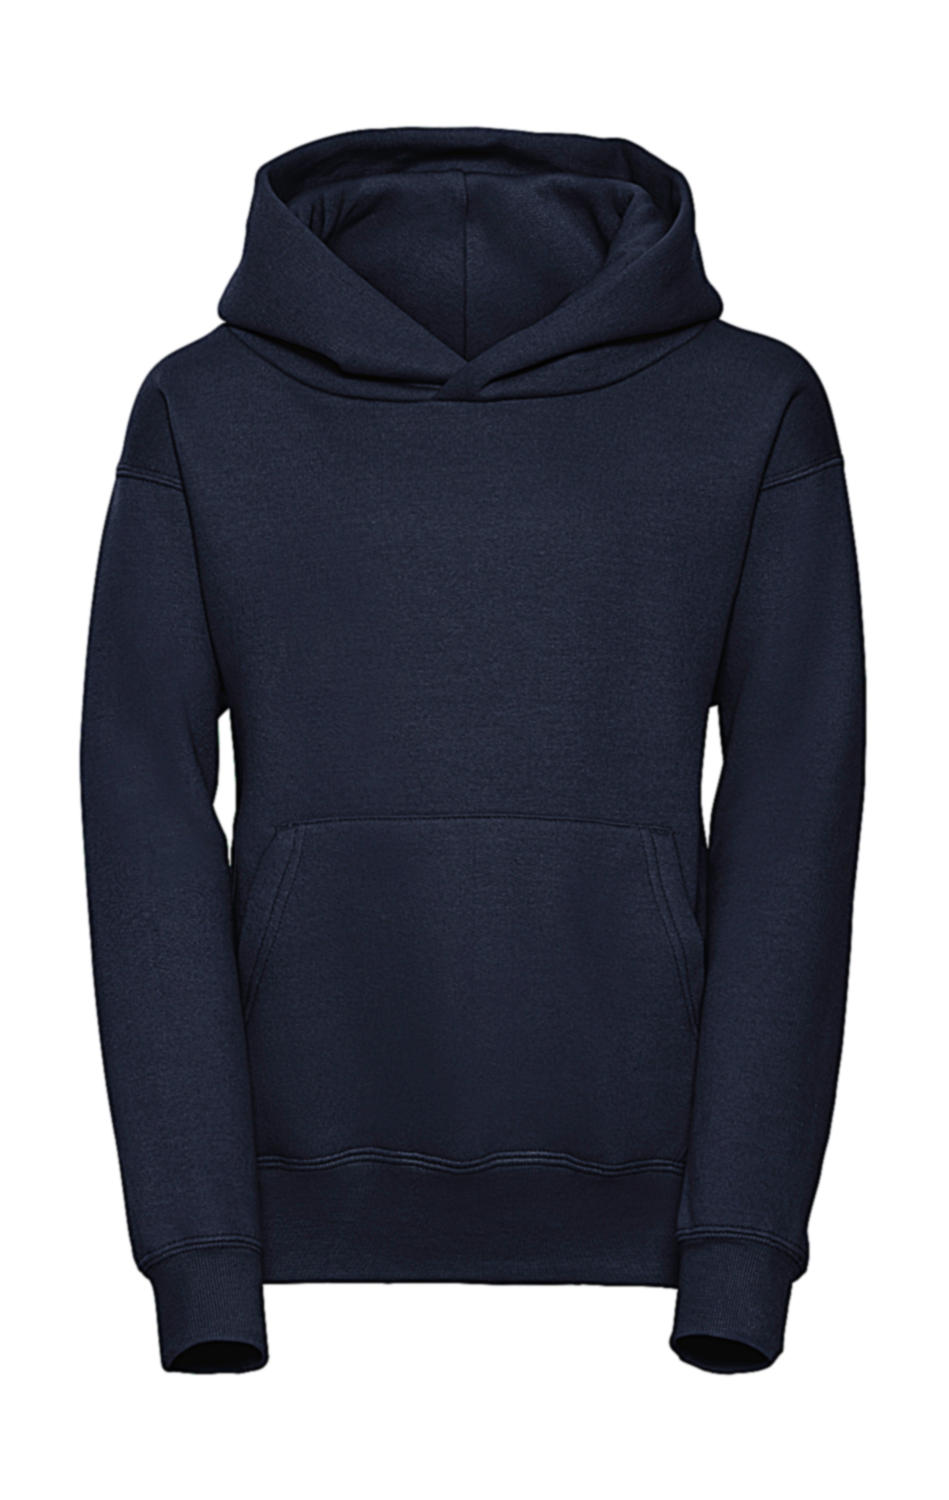  Kids Hooded Sweat in Farbe French Navy